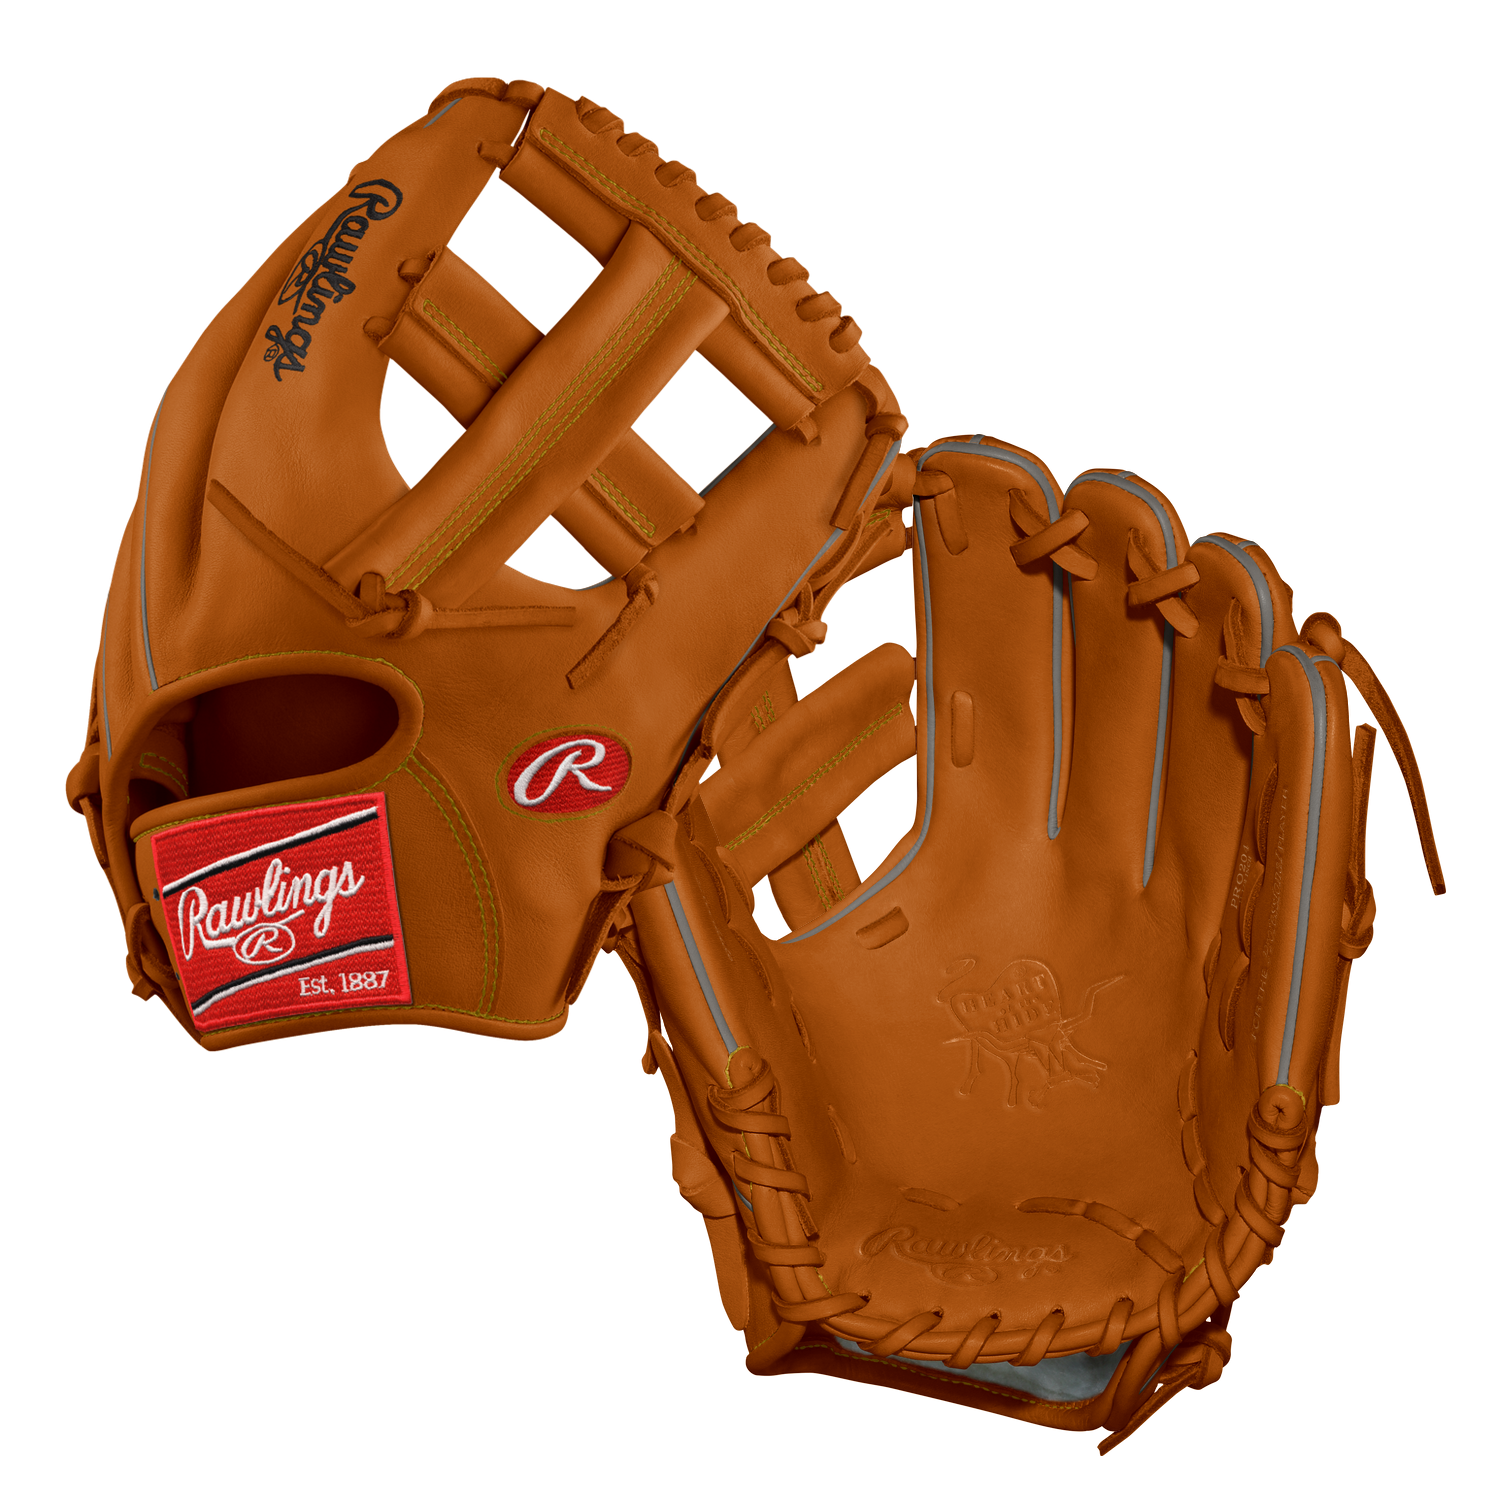     This Rawlings Heart of the Hide tan leather baseball glove, featuring 200 pattern, is a top-of-the-line glove designed specifically for baseball players who excel in the infield and desire the deep pattern that makes the 200 so popular. Crafted with premium materials and meticulous attention to detail, this glove offers exceptional performance and durability on the field. Sporting a classic tan colorway, the Heart of the Hide glove exemplifies the traditional look of a professional baseball glove. The glove is constructed using genuine Heart of the Hide leather, renowned for its superior quality and ability to withstand the rigors of the game. This high-grade leather ensures longevity, allowing the glove to maintain its shape and performance even after extended use. Designed to provide a standard fit, this glove caters to the needs of most players.  With its 11 1/2 size, the glove strikes a balance between a larger catching surface and easy maneuverability, providing infielders with the flexibility they need to make quick, precise plays. This Heart of the Hide Tan Leather glove features a single post web, which offers a combination of flexibility and stability. This web design allows for excellent ball control, making it easier to secure and release the ball quickly during fielding.  Embellished with the classic white-on-scarlet logo patch, this glove showcases the iconic Rawlings branding. The tan leather shell and palm, along with tan laces and lining, contribute to the glove's classic aesthetic. The palm welting, split gray welting back, and tan binding enhance the glove's structural integrity and reinforce its longevity. With vegas gold stitching and an indent stamping, the Rawlings Heart of the Hide Tan Leather glove stands out with its attention to detail. The absence of a palm pad allows for a more natural feel when catching, while the full heel pad provides added protection and comfort. To ensure a comfortable fit, the glove is equipped with thermo-formed wrist lining. This lining wicks away sweat and makes for a comfortable fit. The Rawlings Heart of the Hide Tan Leather baseball glove, with its 200 pattern and deep pocket, is a superb choice for infielders seeking a high-performance glove that combines durability, functionality, and classic style. With its top-quality construction, attention to detail, and ergonomic design, this glove is a reliable companion on the baseball field.    Pattern 204 Sport Baseball Leather Heart of the Hide Fit Standard Throwing Hand Right-Hand Throw Position Infield Size 11 1/2 Web Single Post Color Tan Logo Patch White on Scarlet Leather Tan Shell Palm Tan Laces Tan Lining Tan Welting Palm Split Gray Welting Back Split Gray Binding Tan Stitching Vegas Gold Stamping Indent No Palm Pad No Heel Pad Full  Wrist Lining Thermo Formed                 